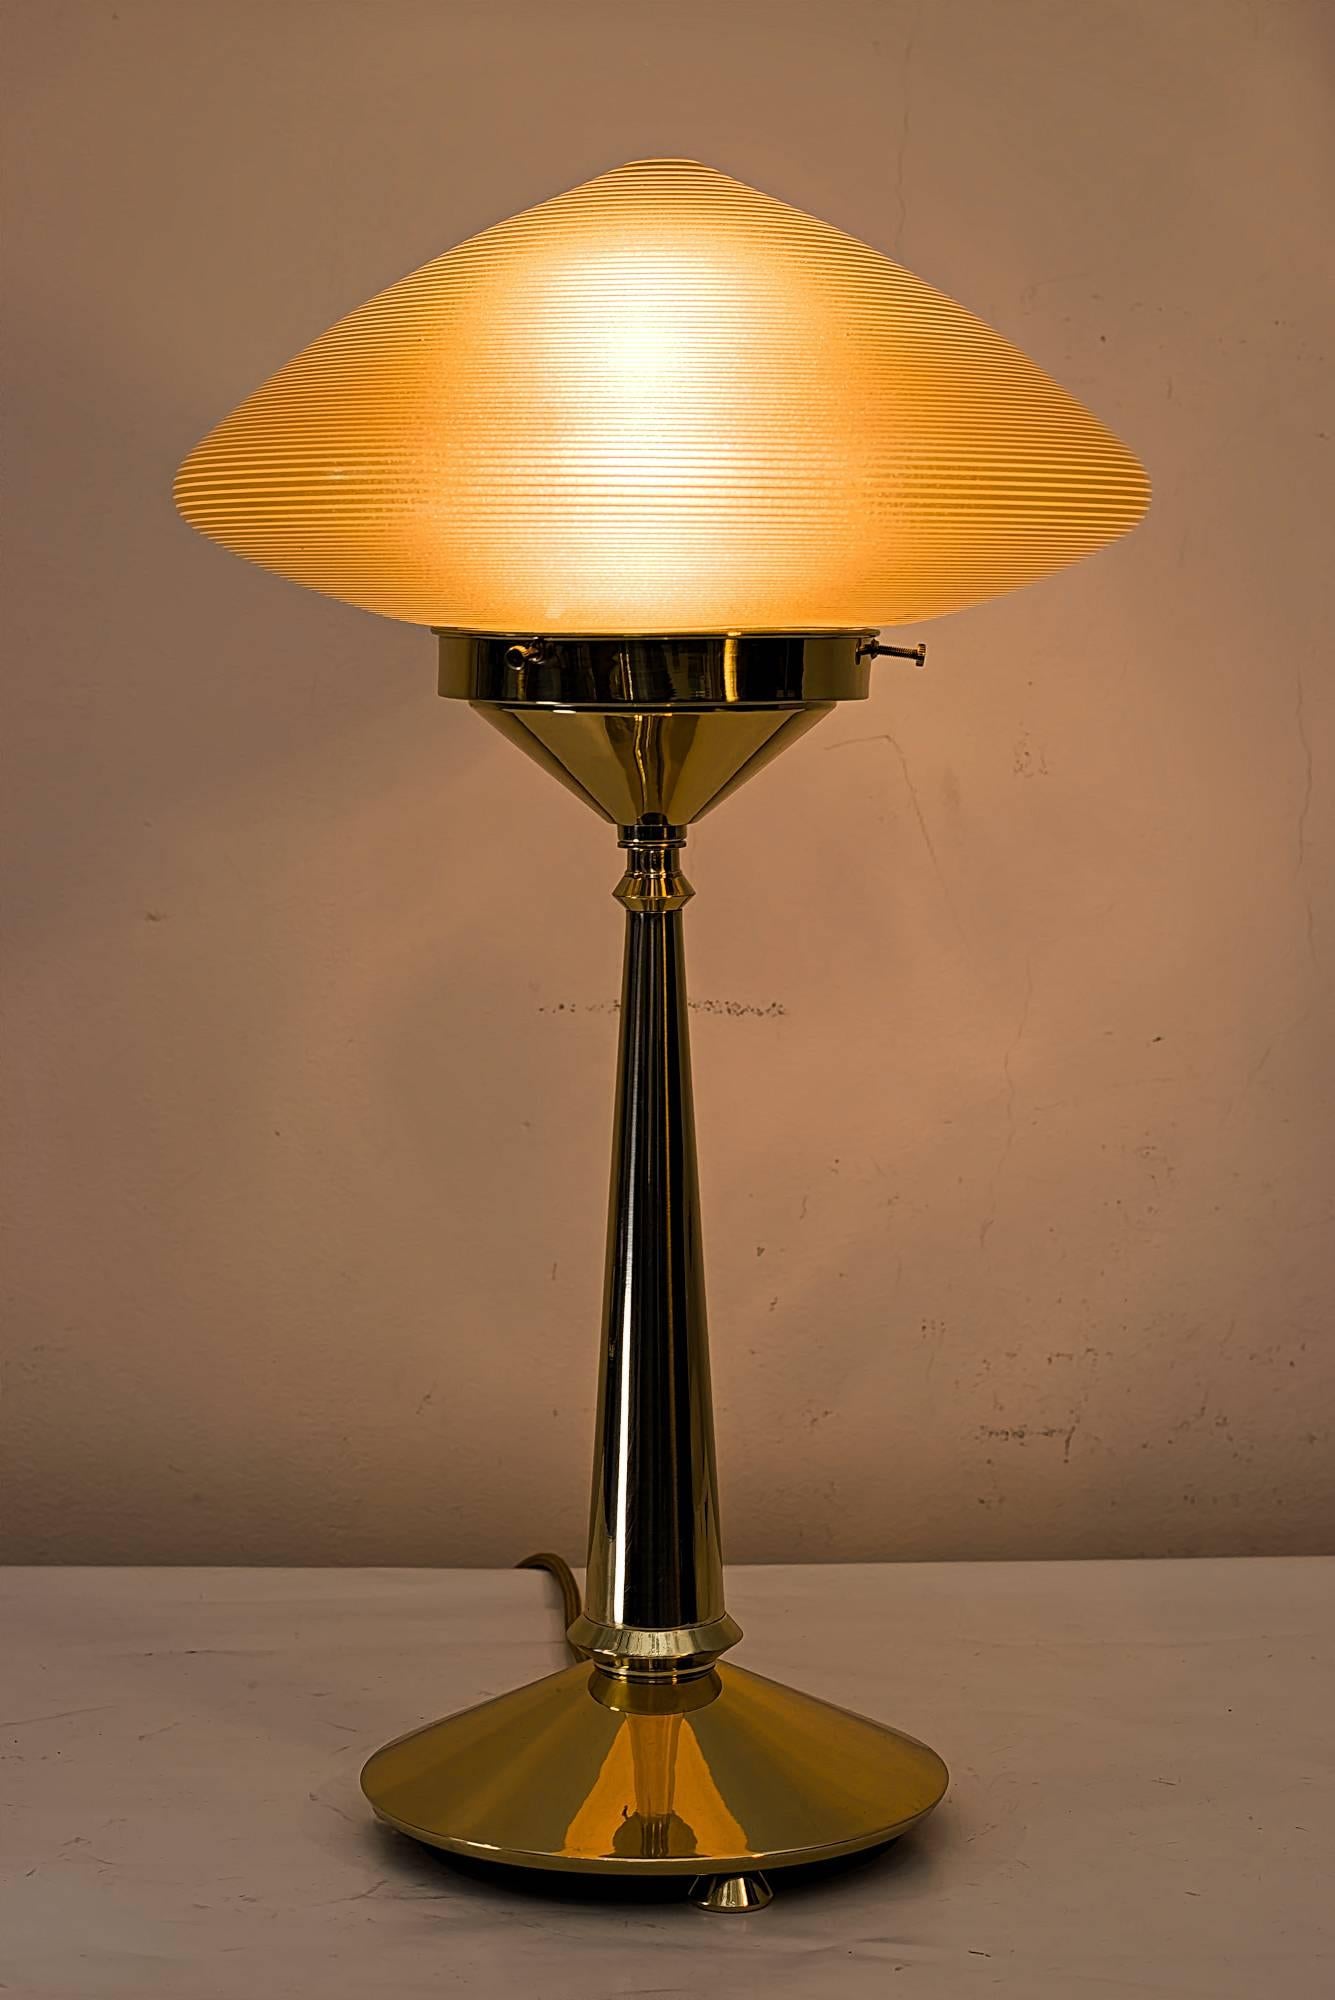 Beautiful table lamp with fantastic original glass shade polished and stove enameled.